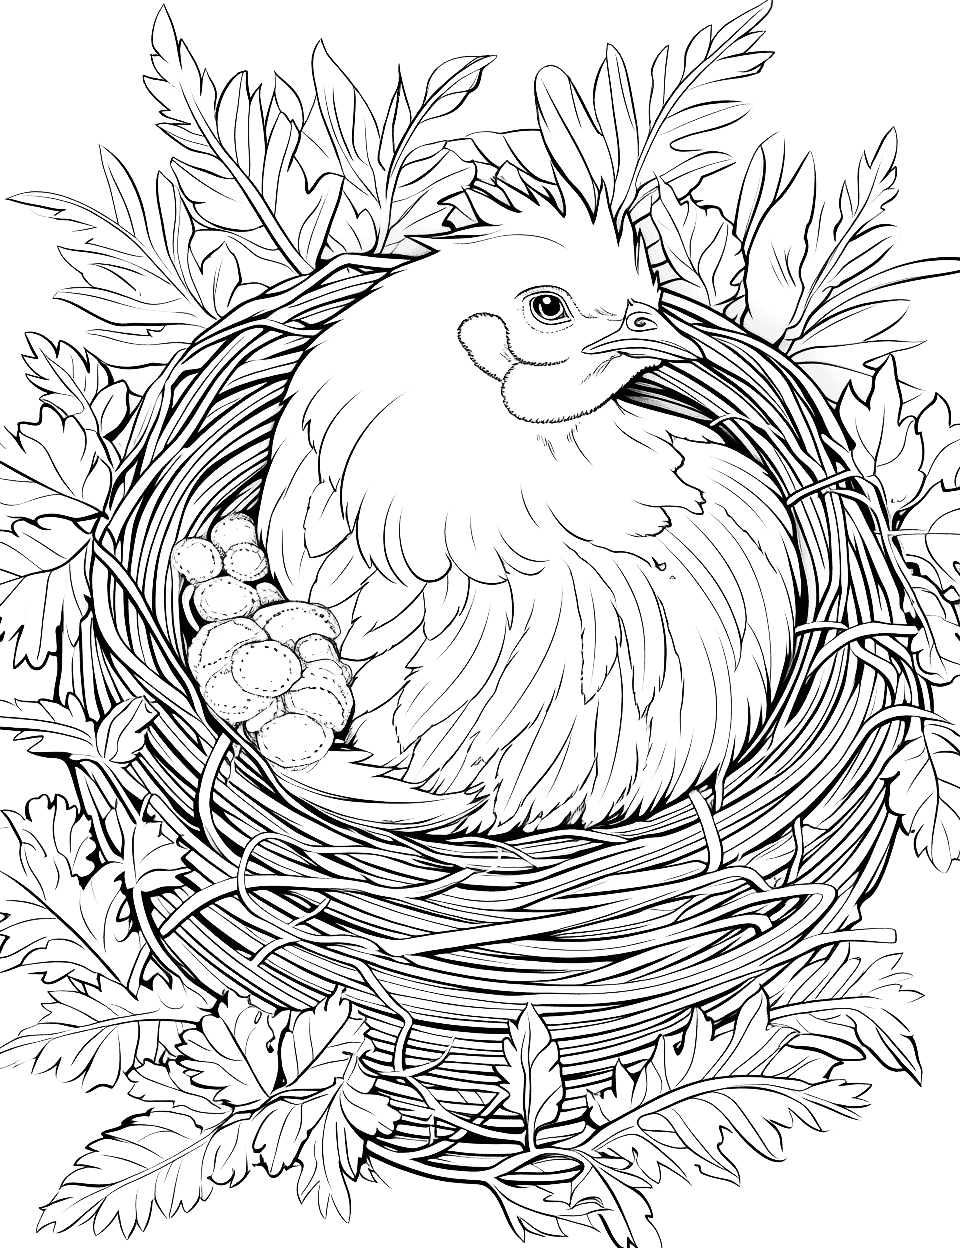 Chicken's Cozy Nest Adult Coloring Page - A chicken settling comfortably in its straw nest.